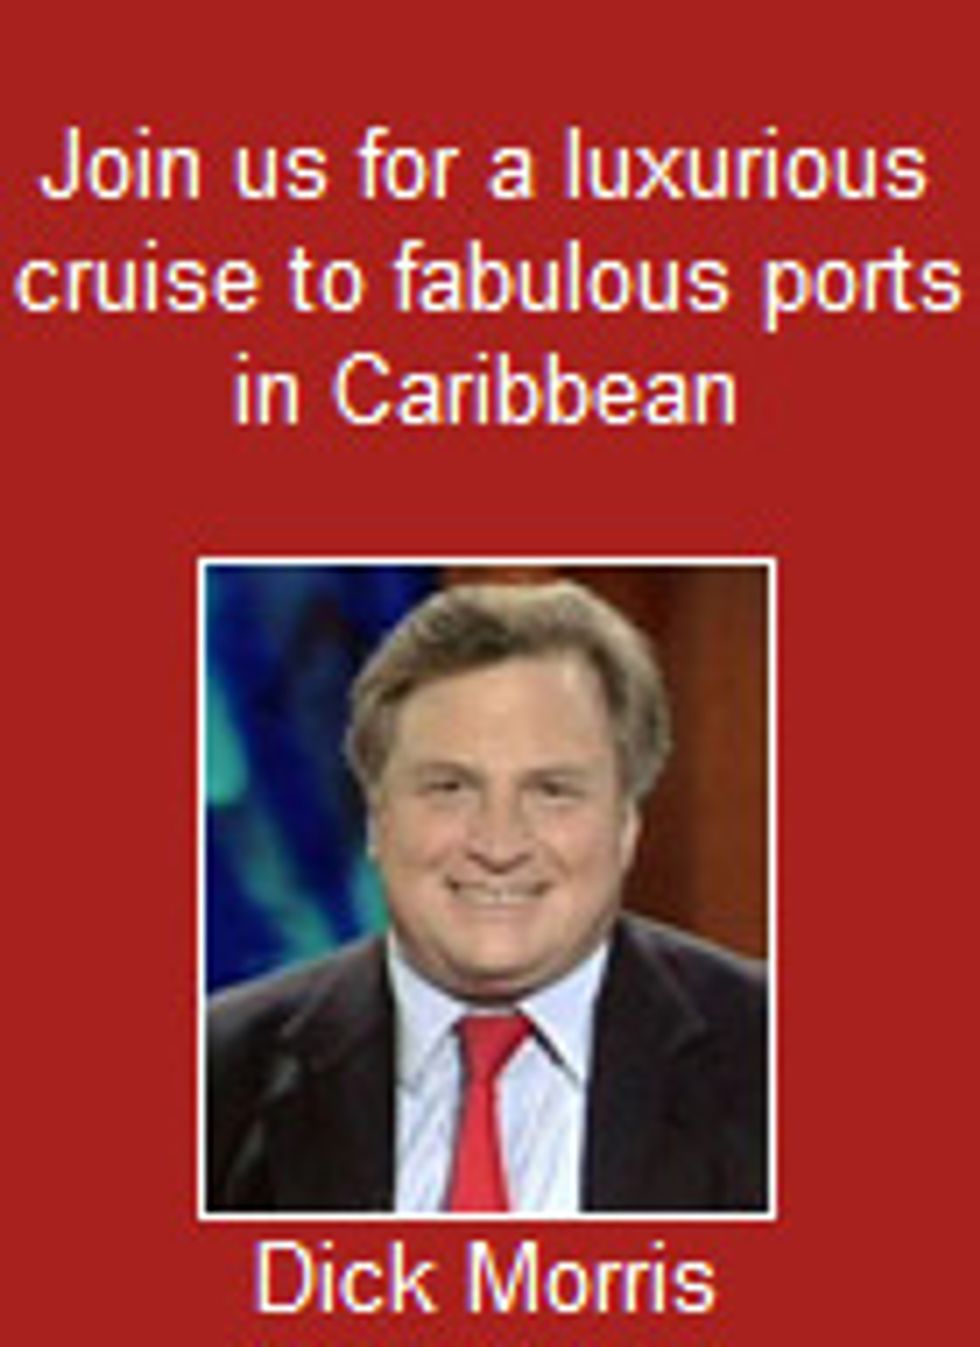 Join Subhuman Scumbag Dick Morris & Some Wingnuts For a Terrible Holiday Cruise!